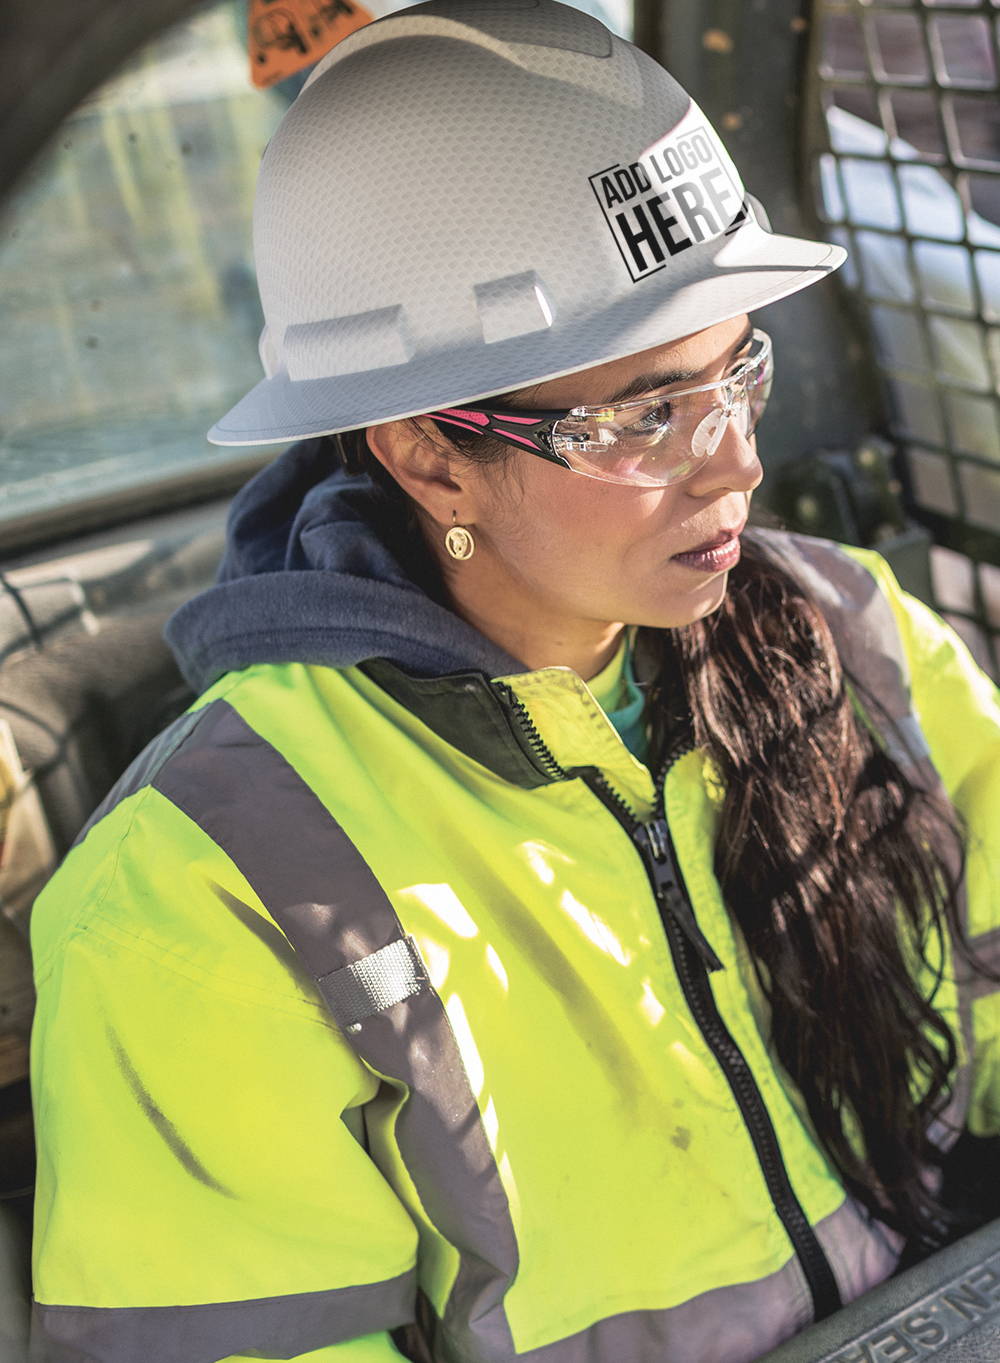 Female construction worker wearing hi-vis jacket, safety glasses and hard hat with company logo custom printed on front of hard hat.